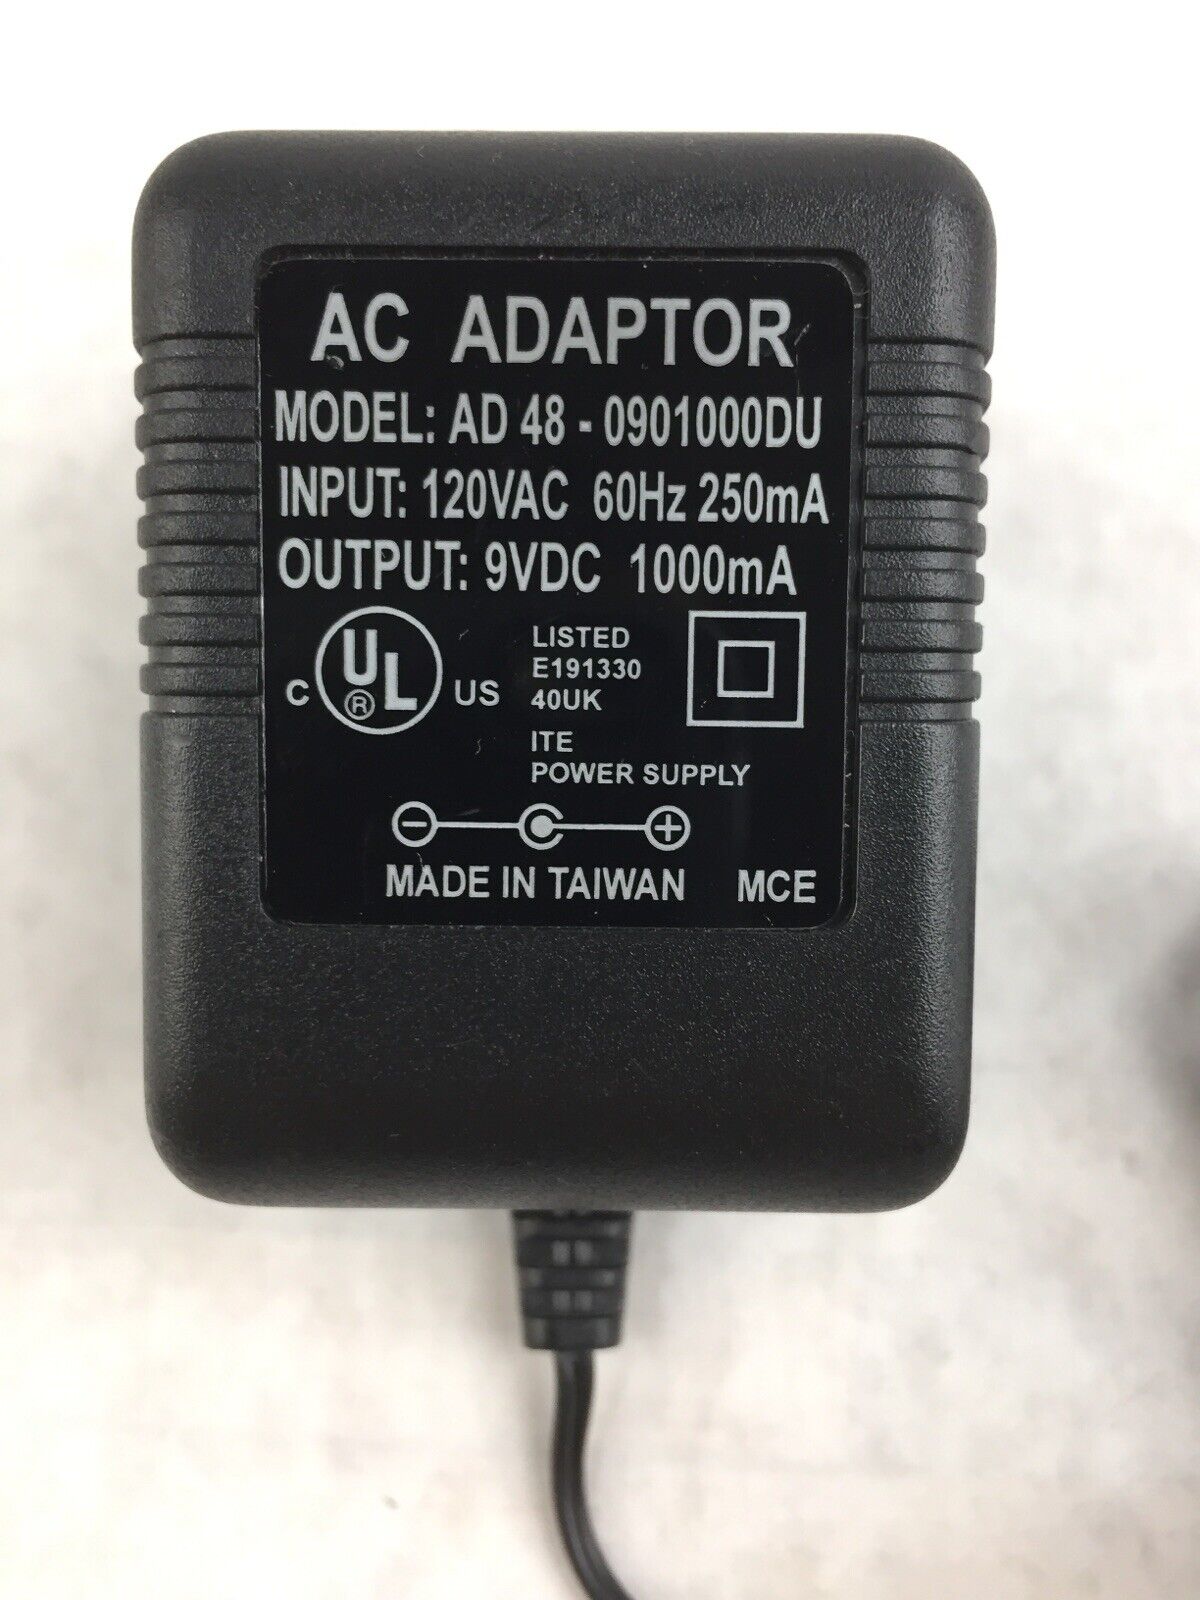 AC Adapter Model AD48-1351000 DU Output 13.5 VDC 1A ITE